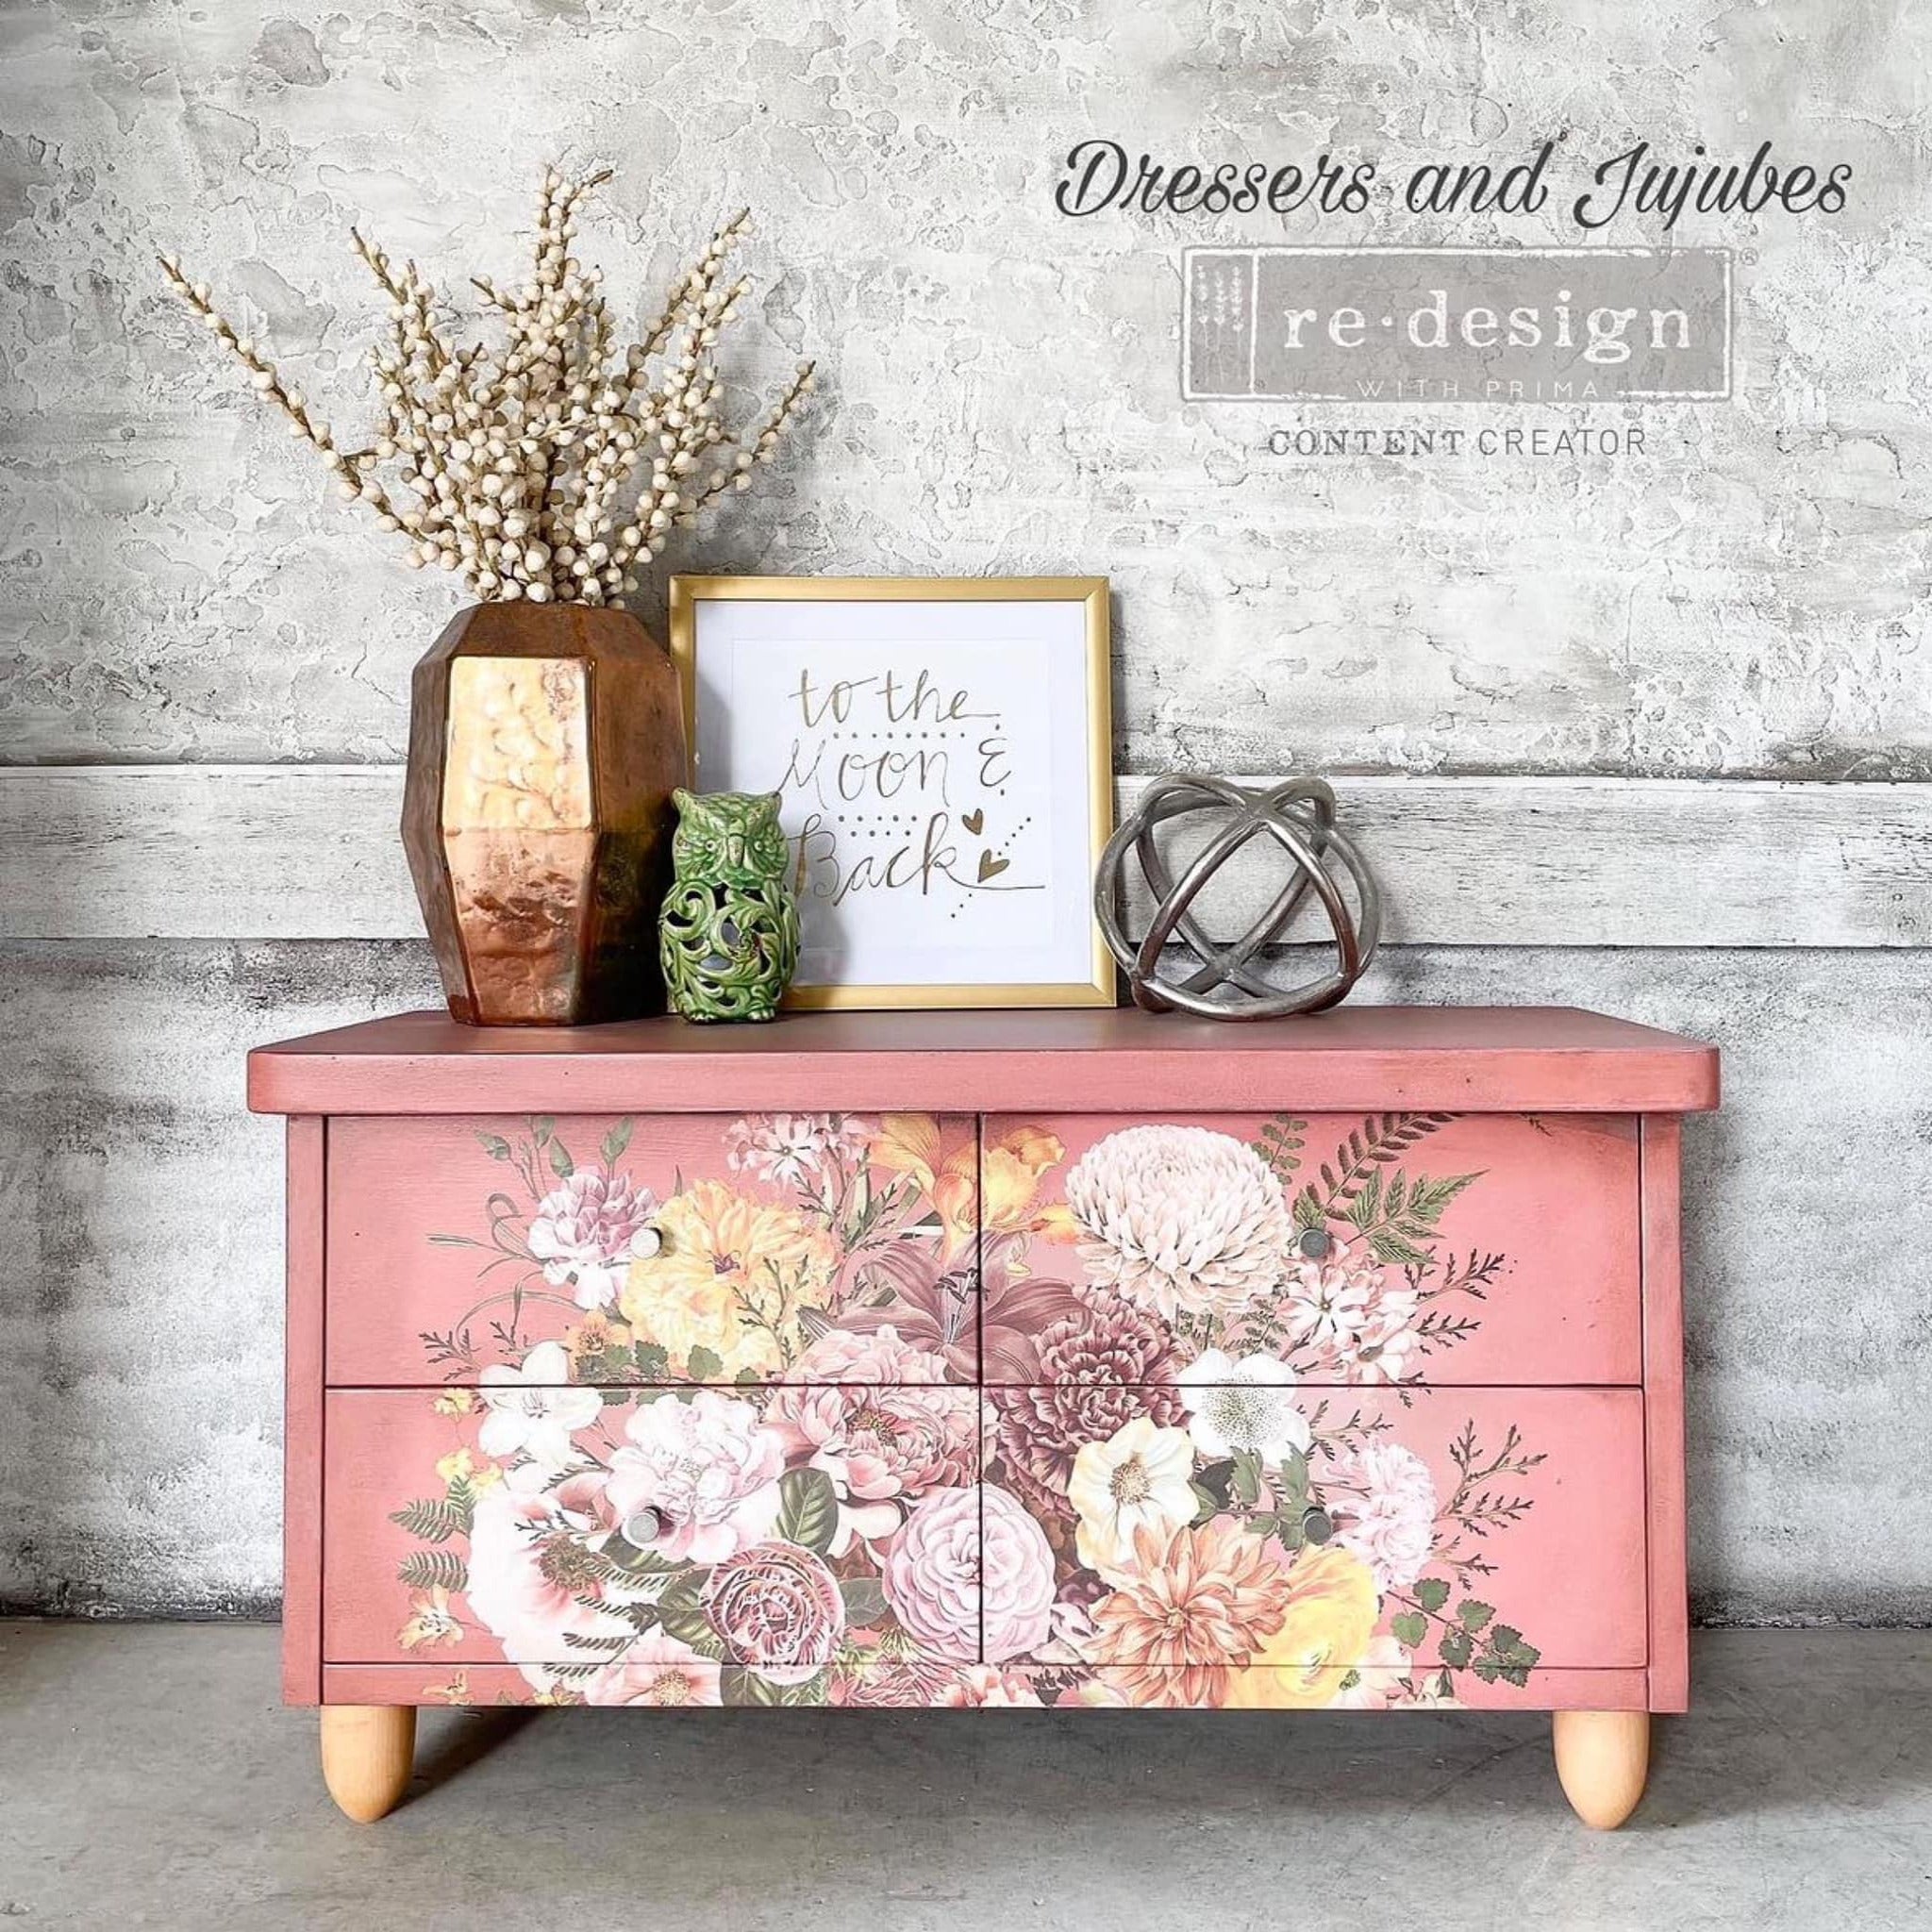 A vintage 4-drawer dresser refurbished by Dressers and Jujubes is painted coral pink and features ReDesign with Prima's Kacha Woodland Floral transfer on the center of its drawers.